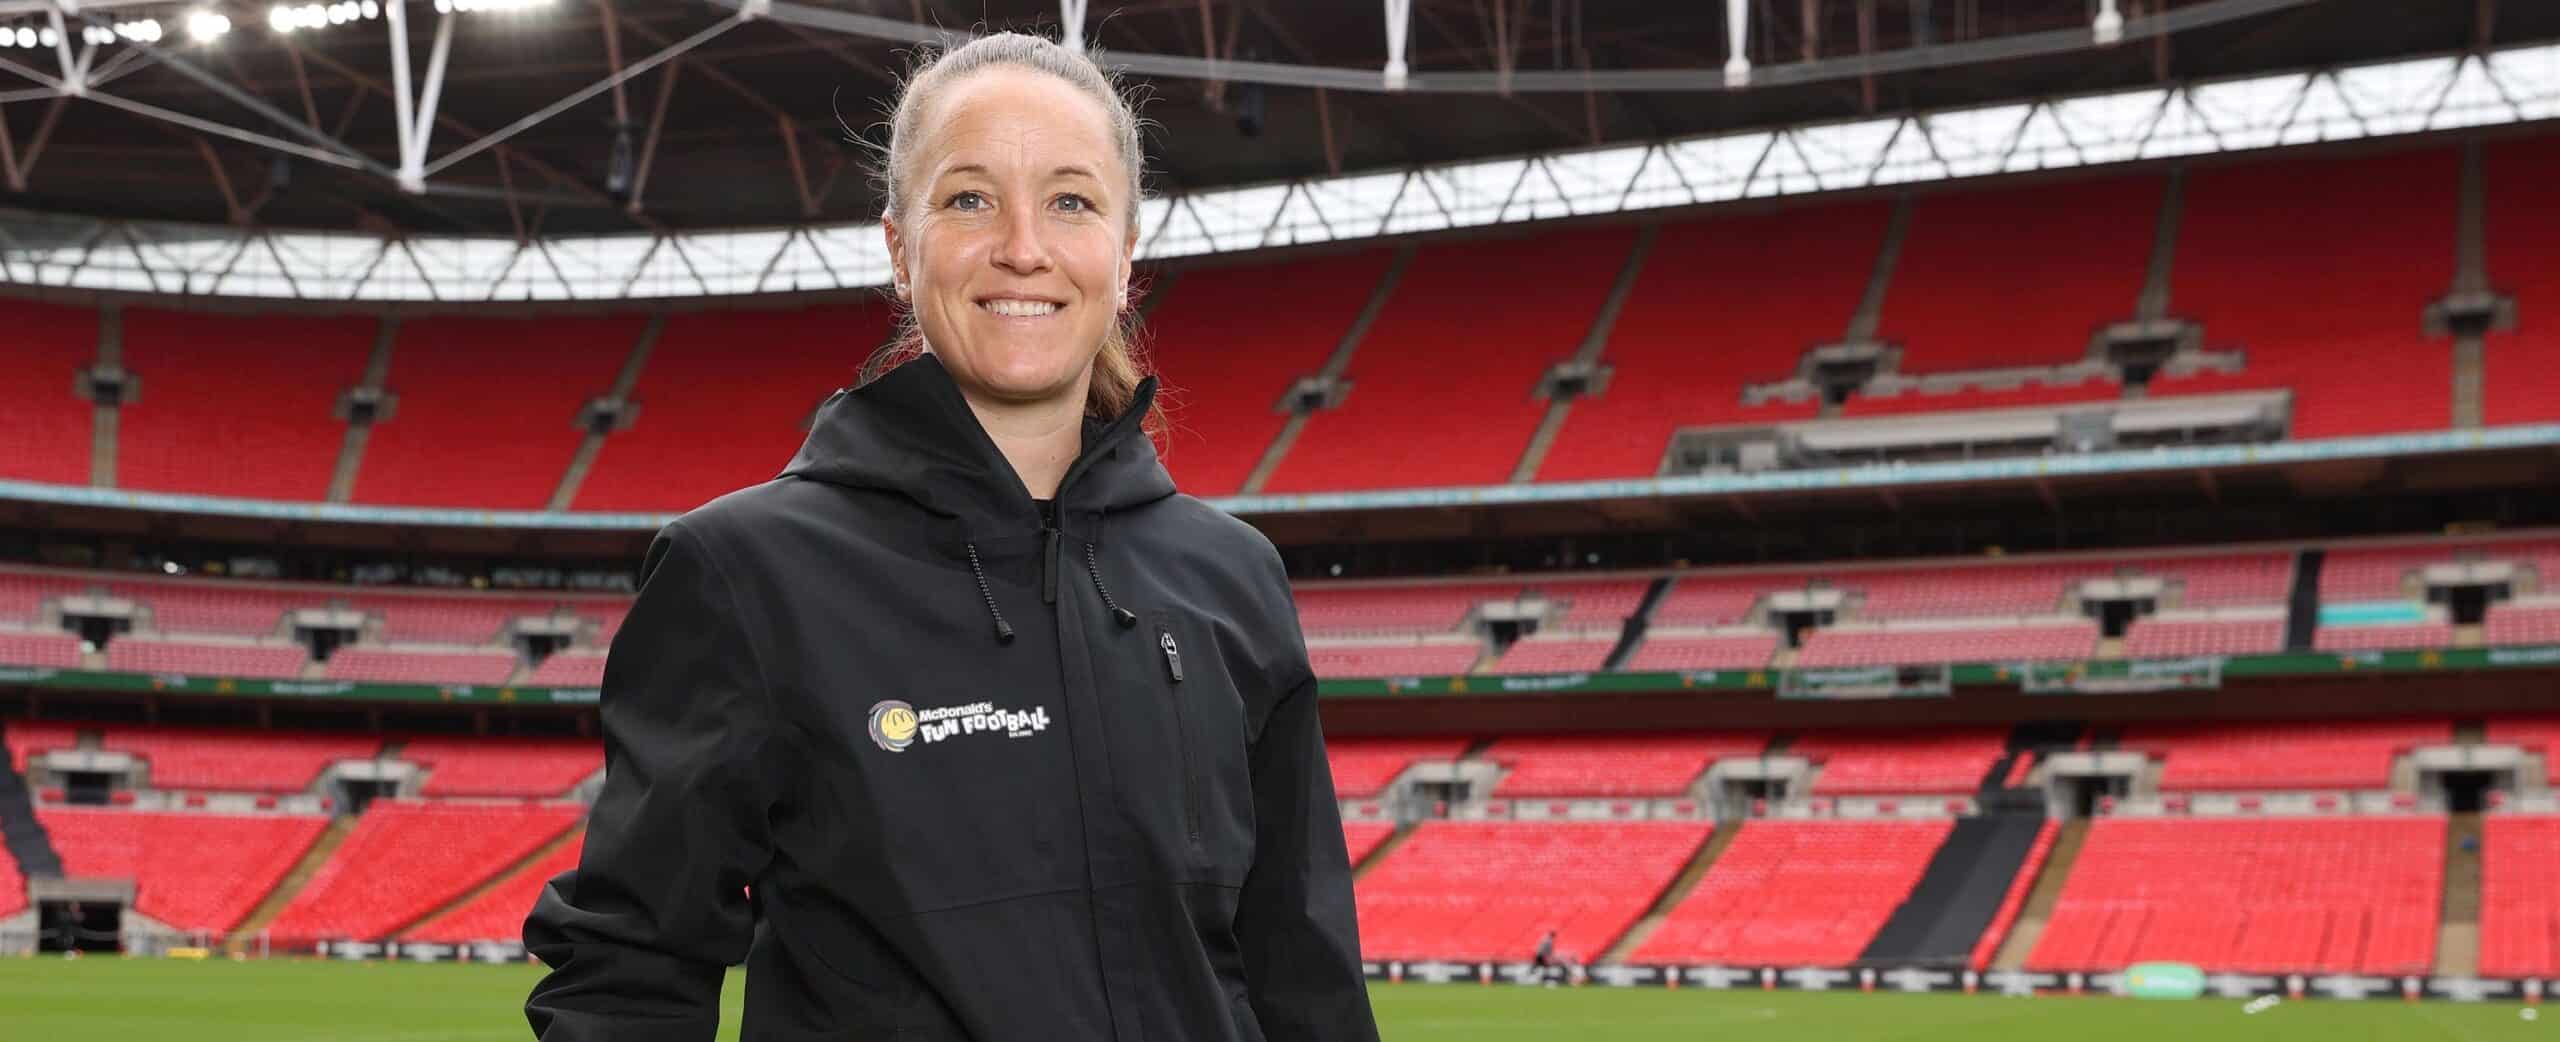 Lioness legend casey stoney on giving all kids the opportunity to try football